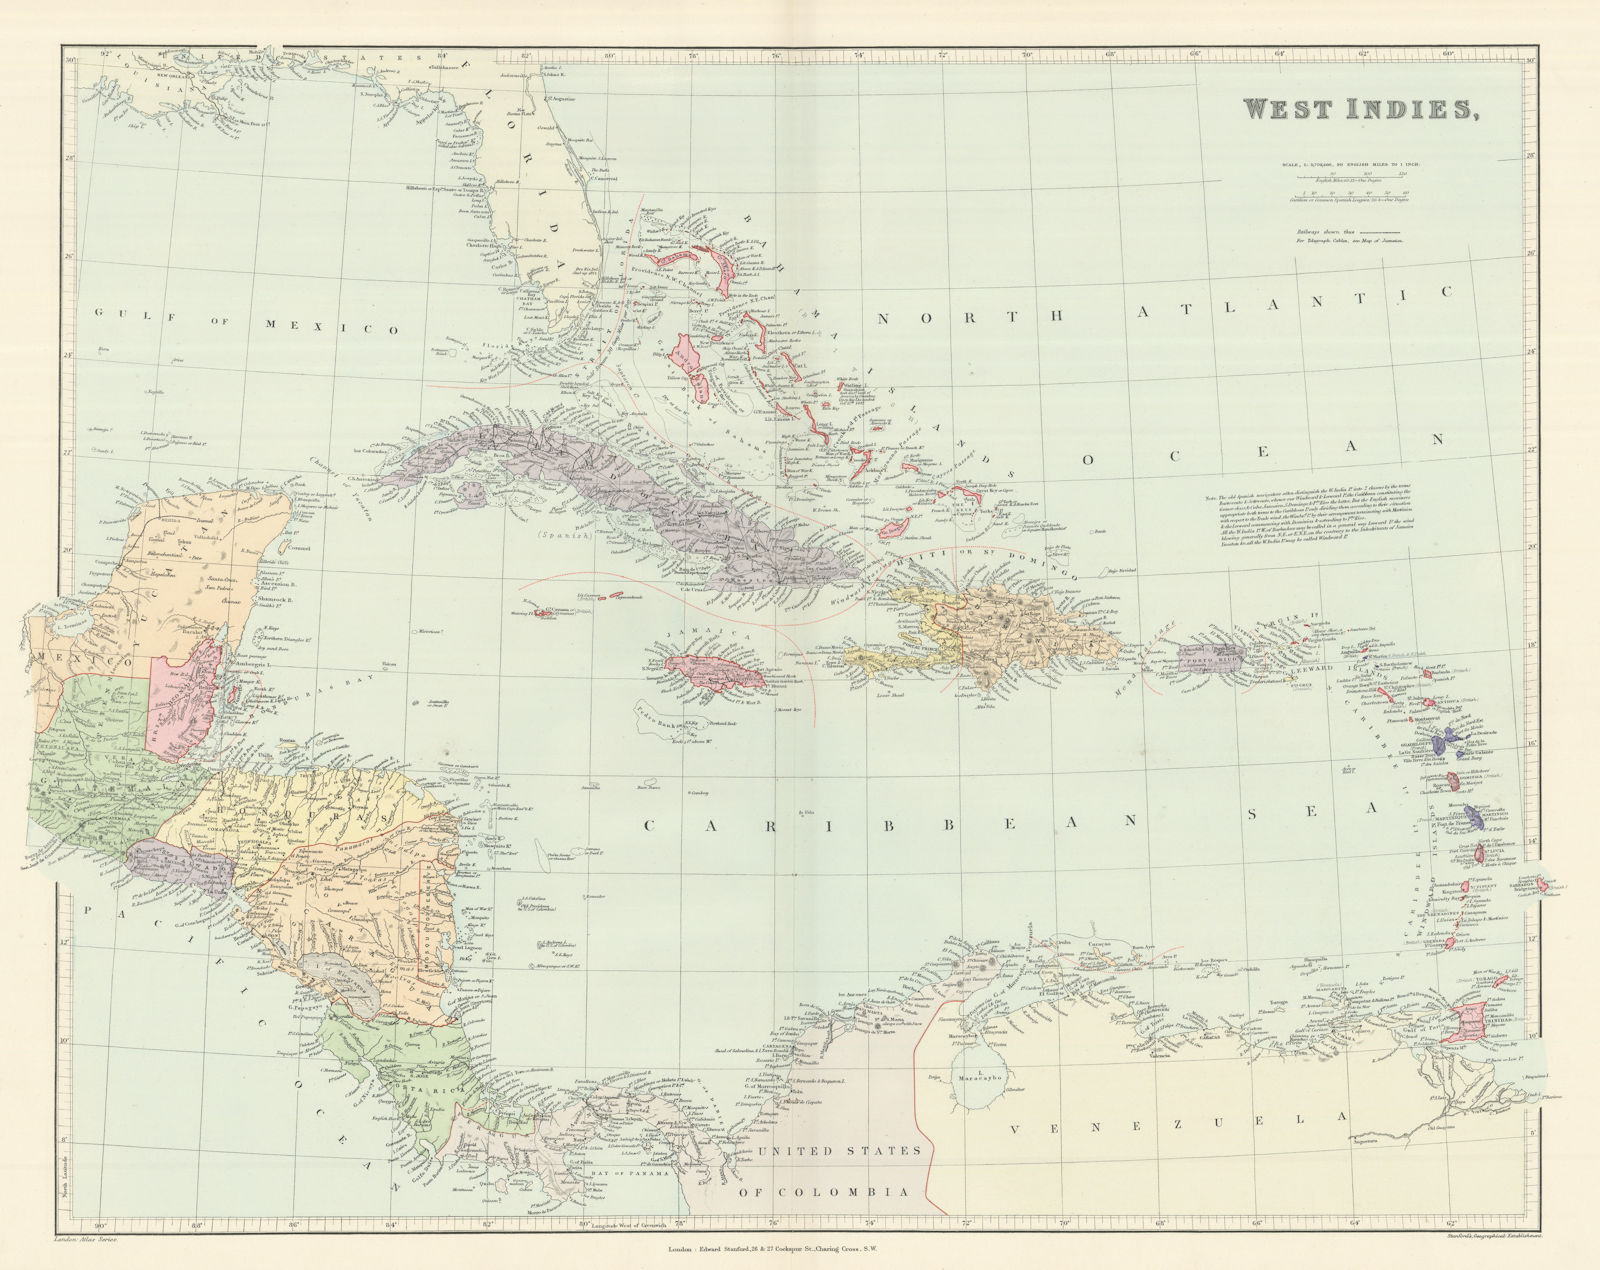 Associate Product West Indies Islands & Central America. Caribbean. STANFORD 1894 old map